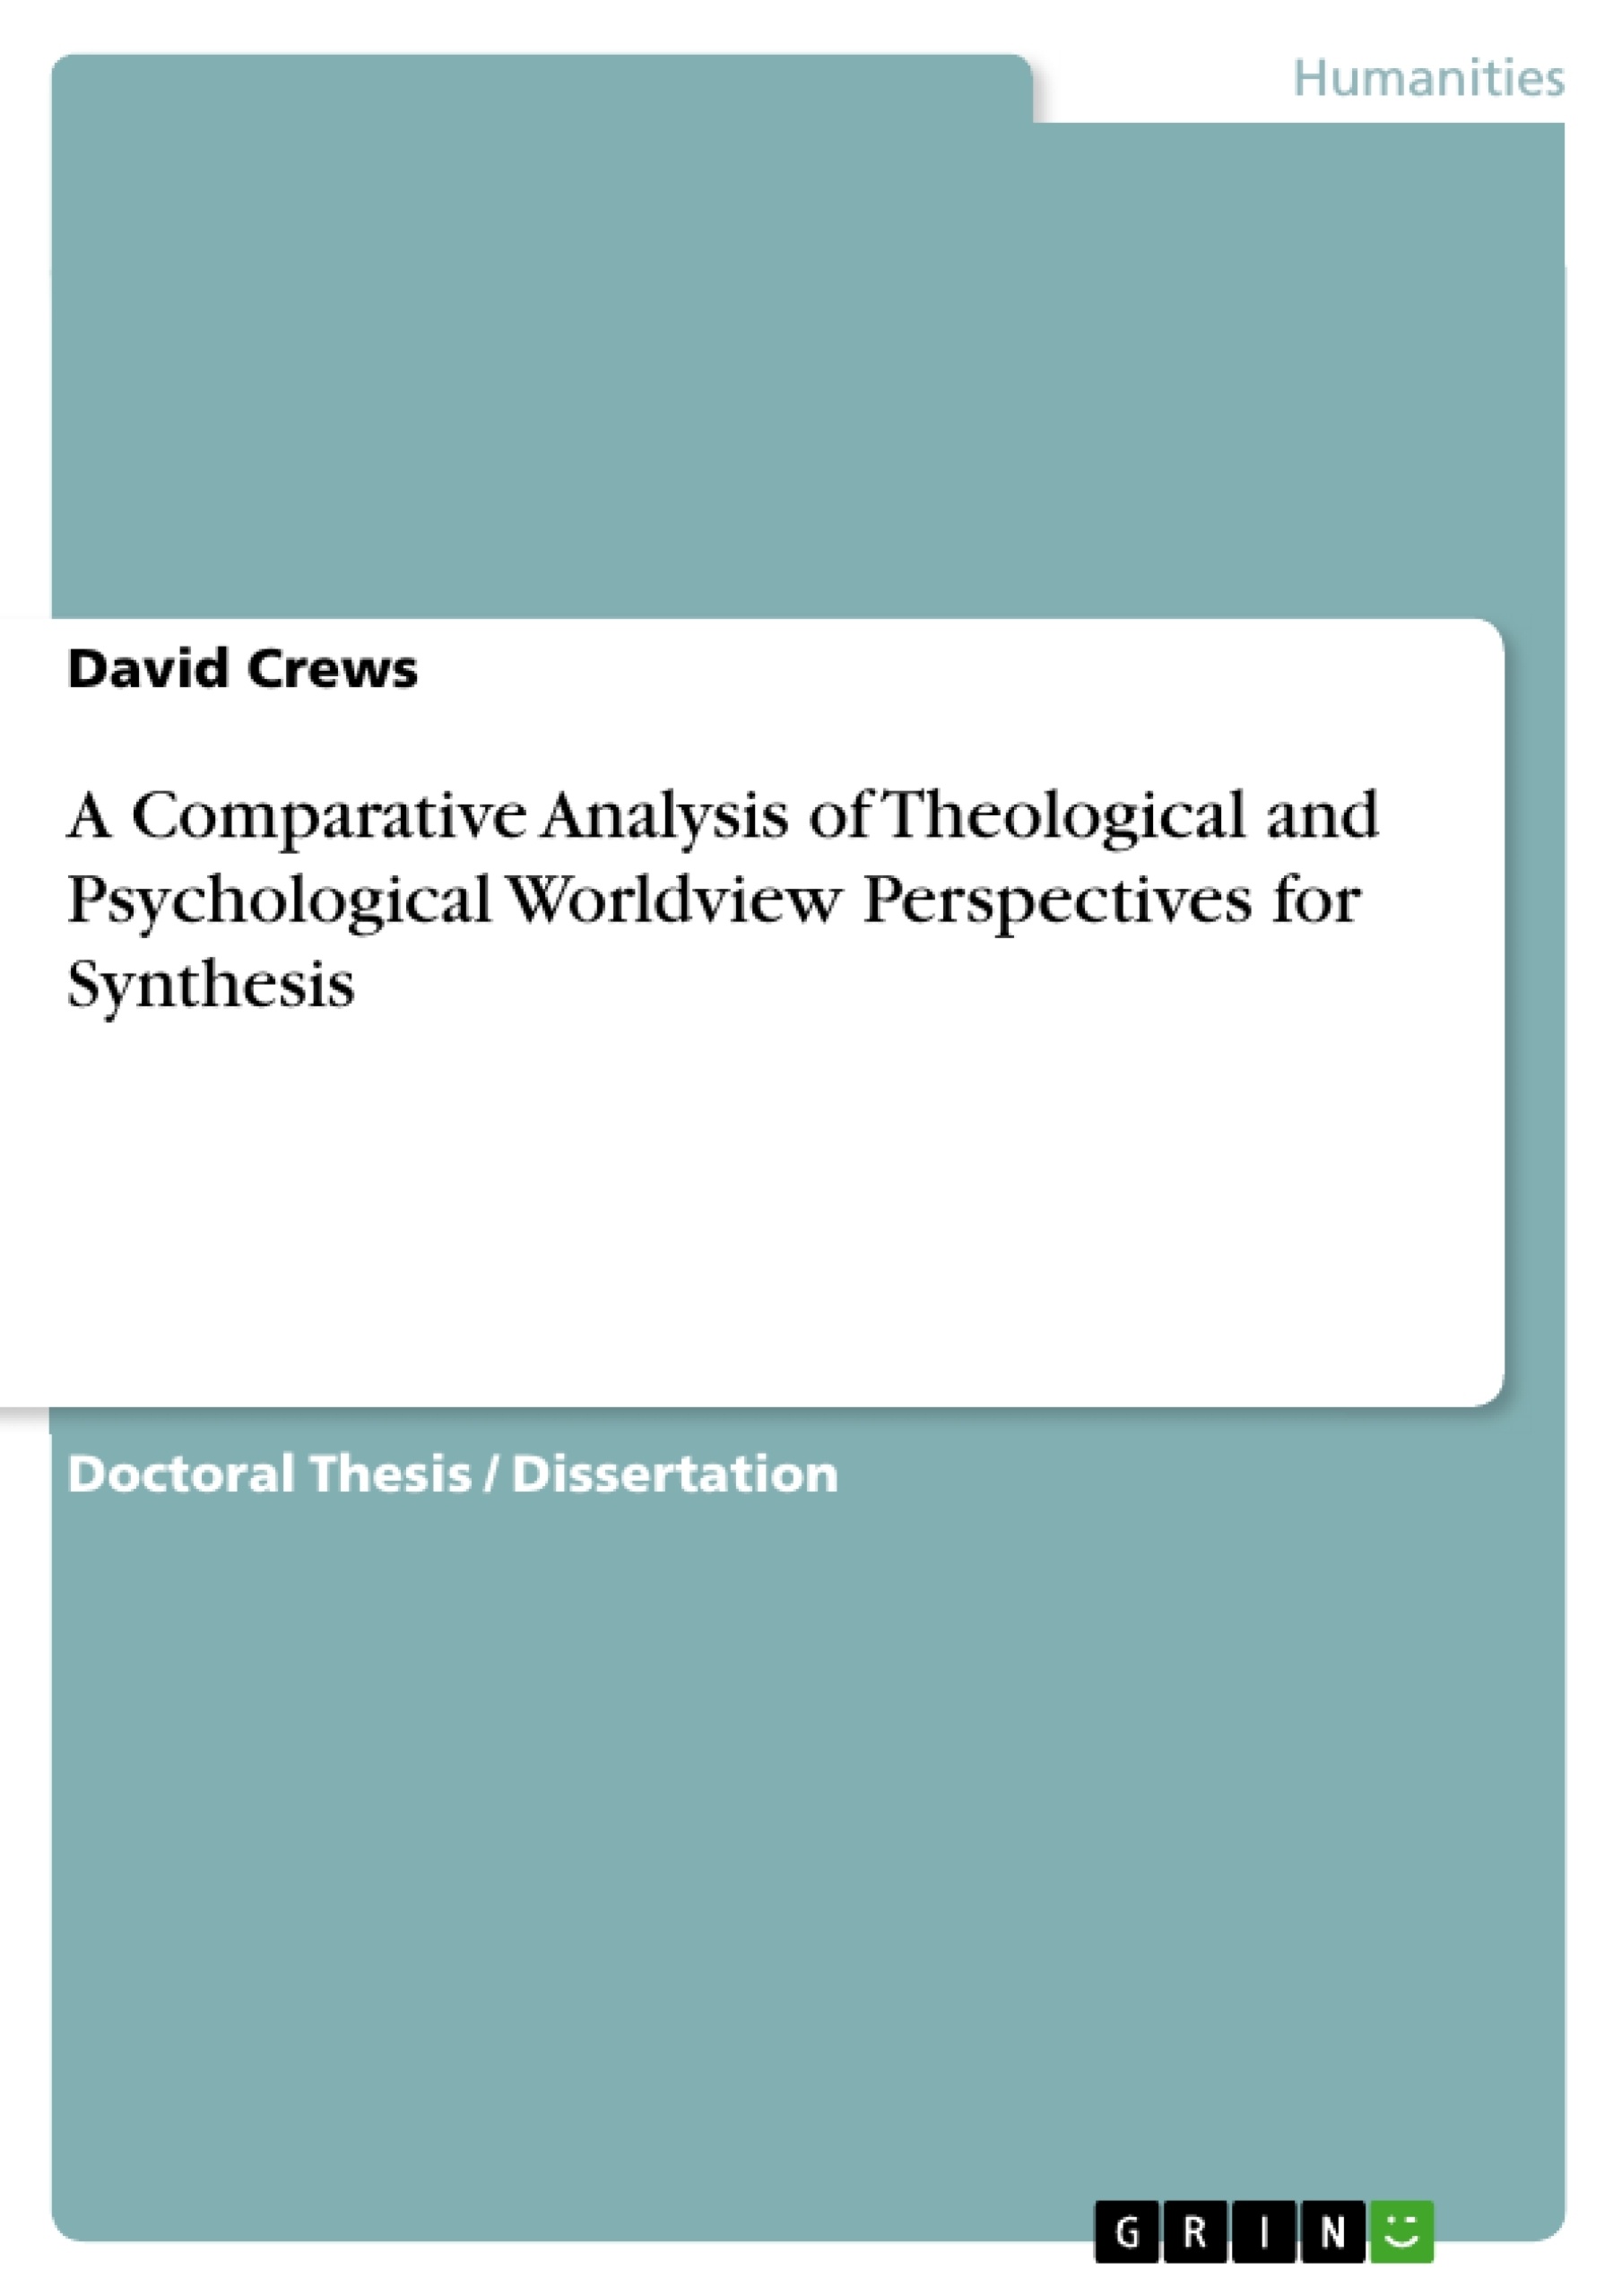 of　A　Analysis　and　Synthesis　Perspectives　Comparative　Worldview　Psychological　Theological　for